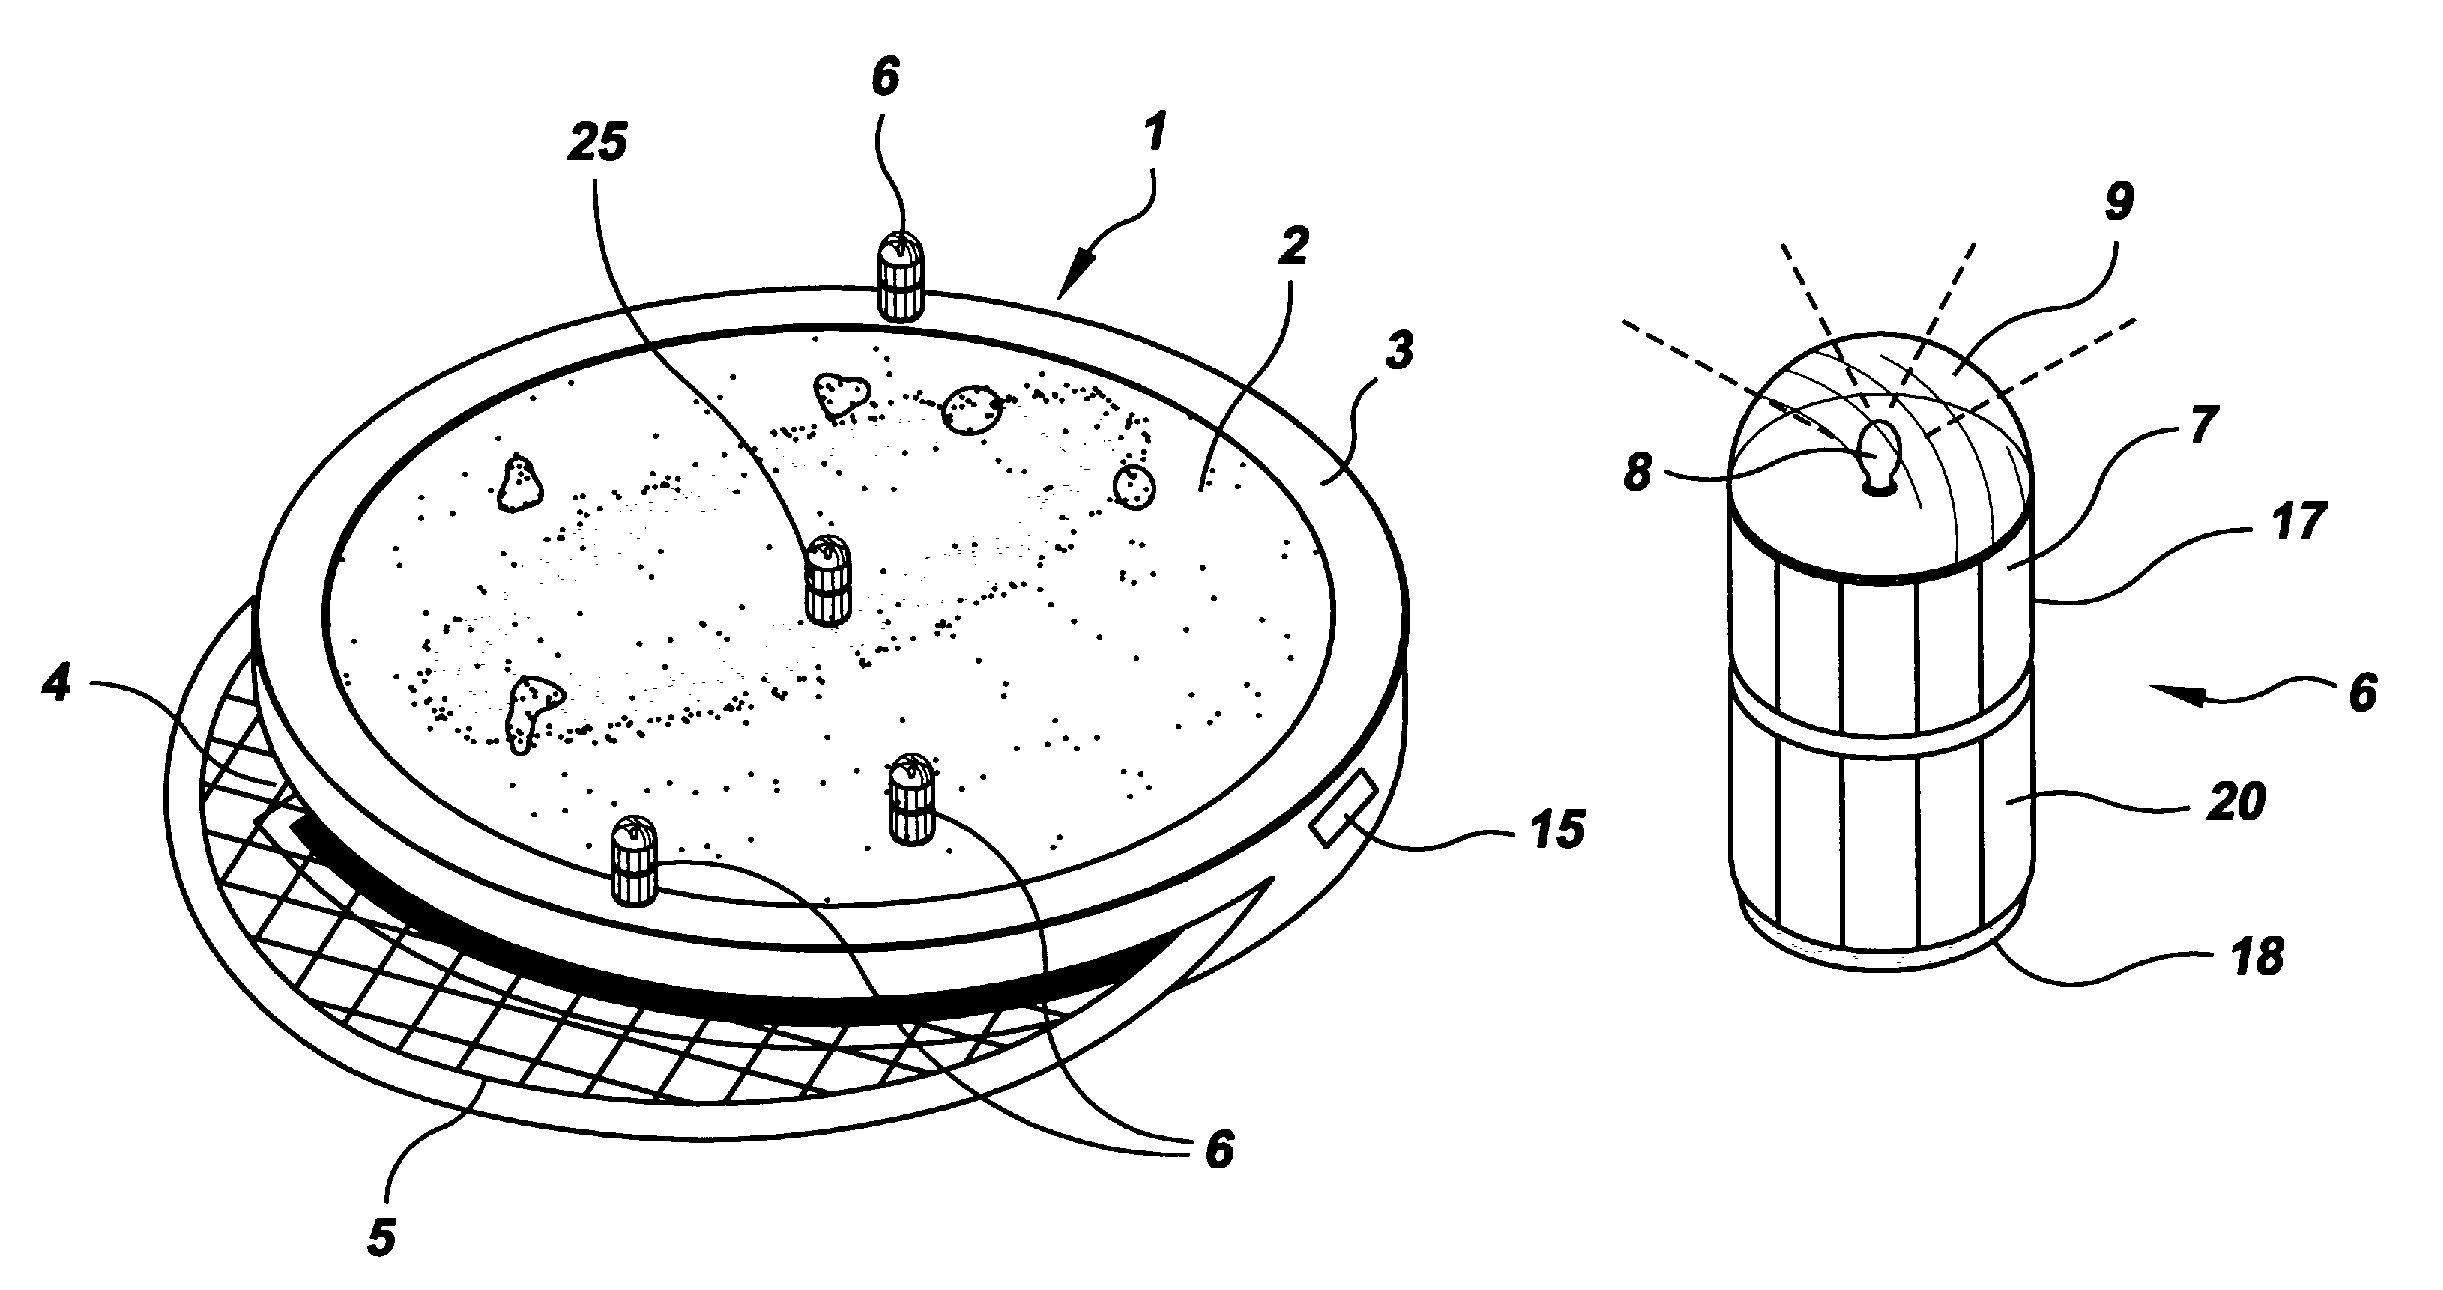 Galactic board game method and apparatus